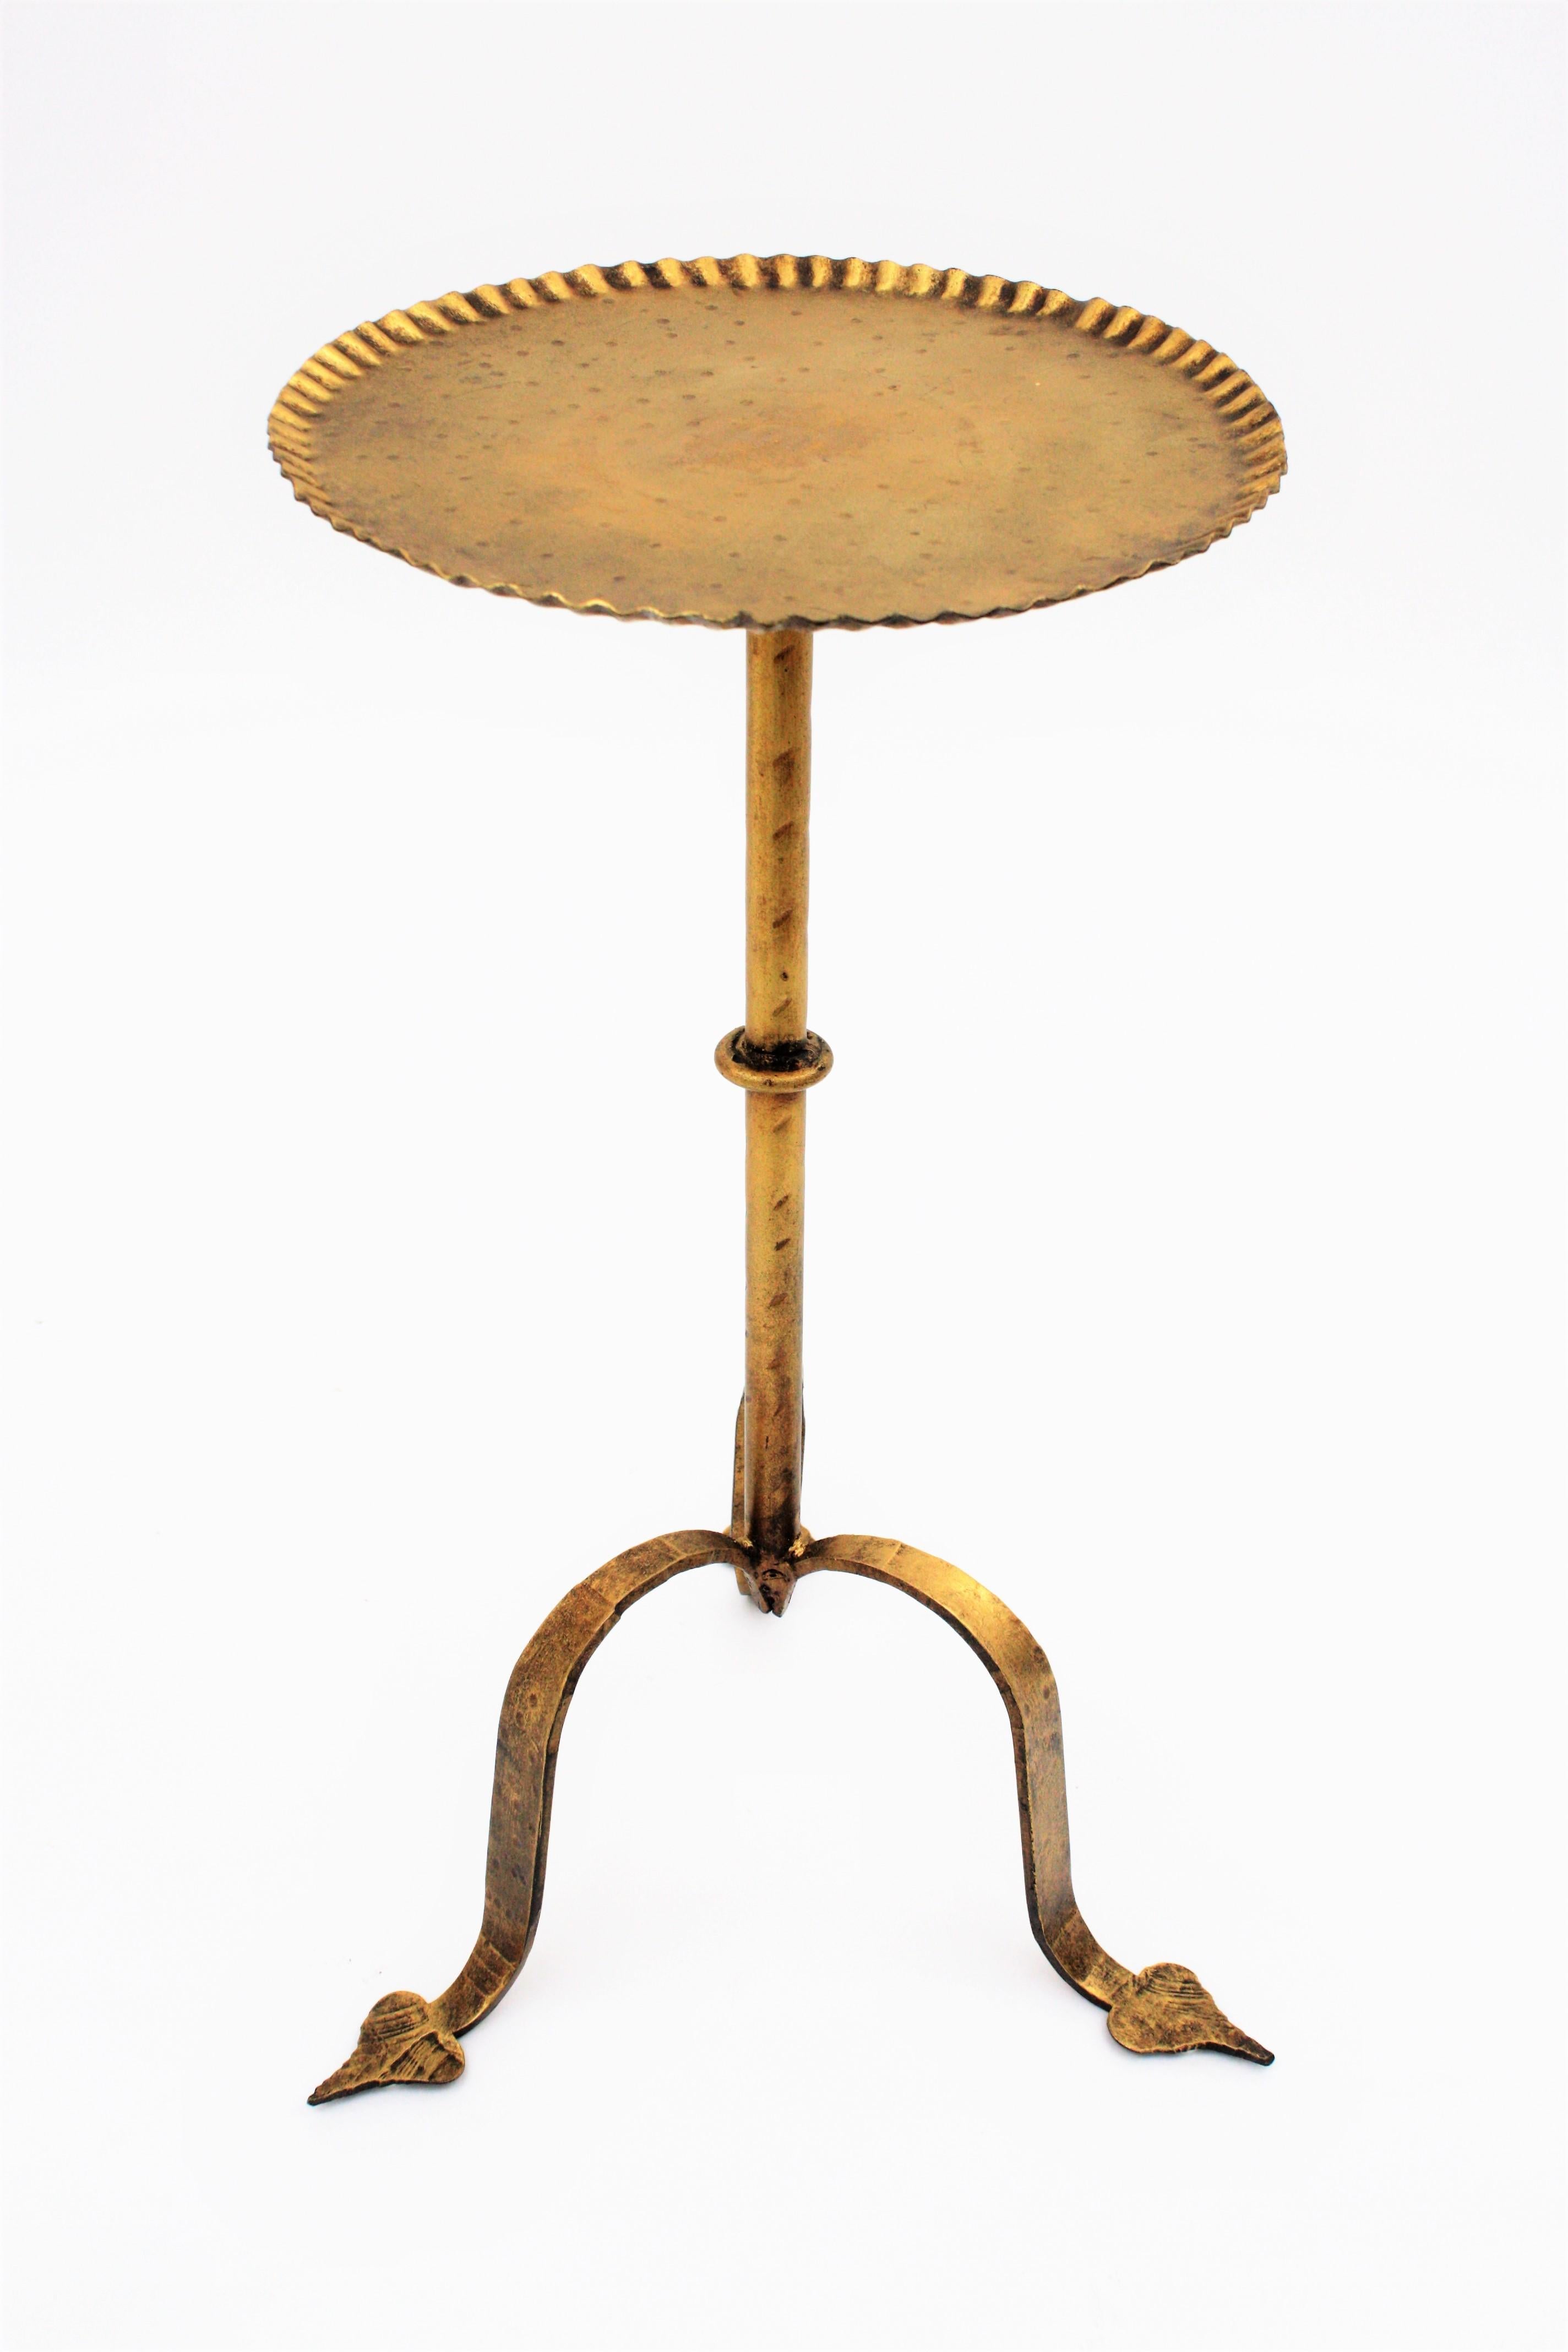 Spanish Gilt Iron Drinks Table Gueridon Side Table or Stand with Scalloped Rim 7